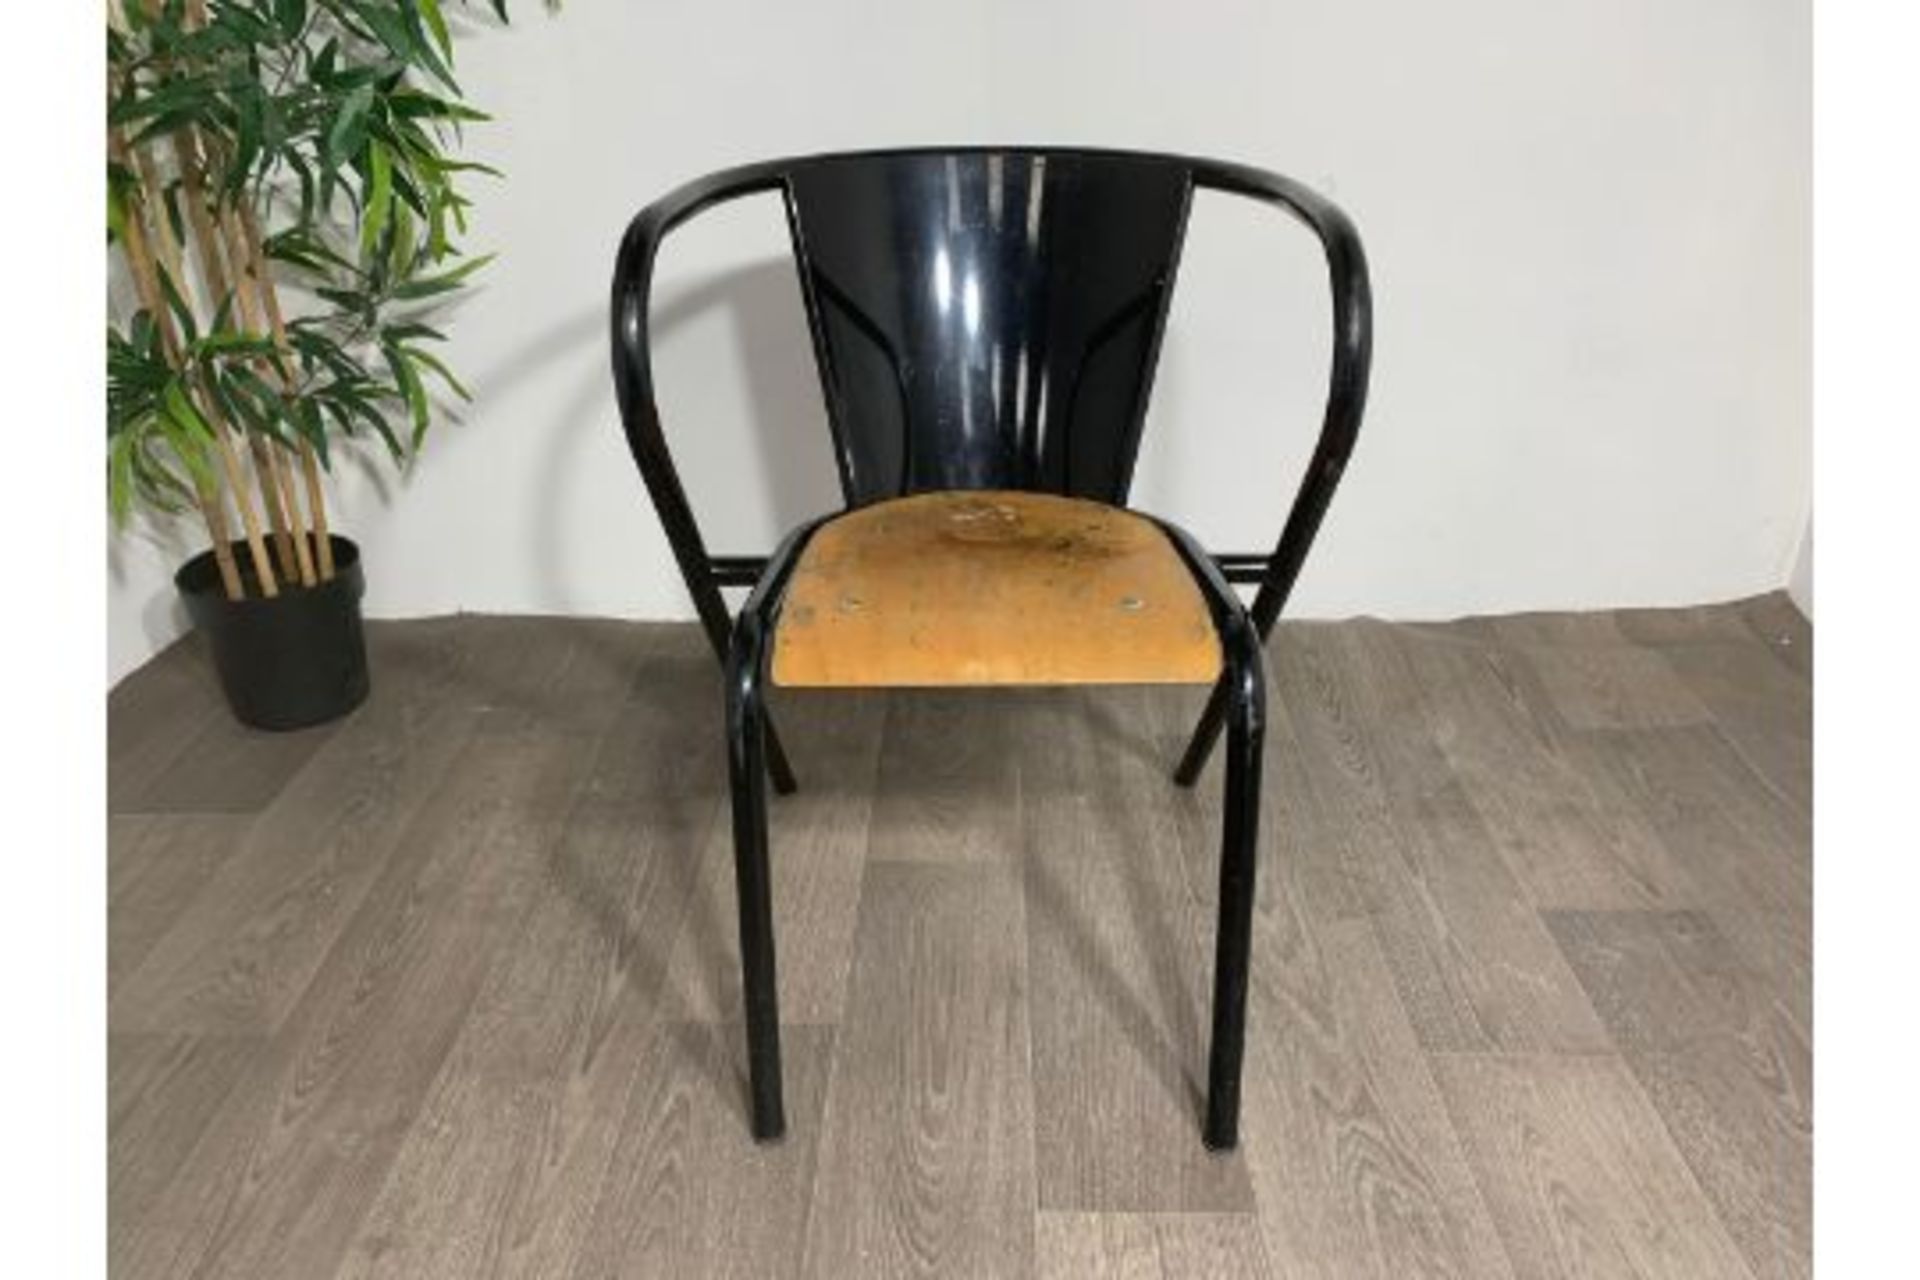 Adico 5008 Black Chair With Wooden Seat x2 - Image 6 of 7